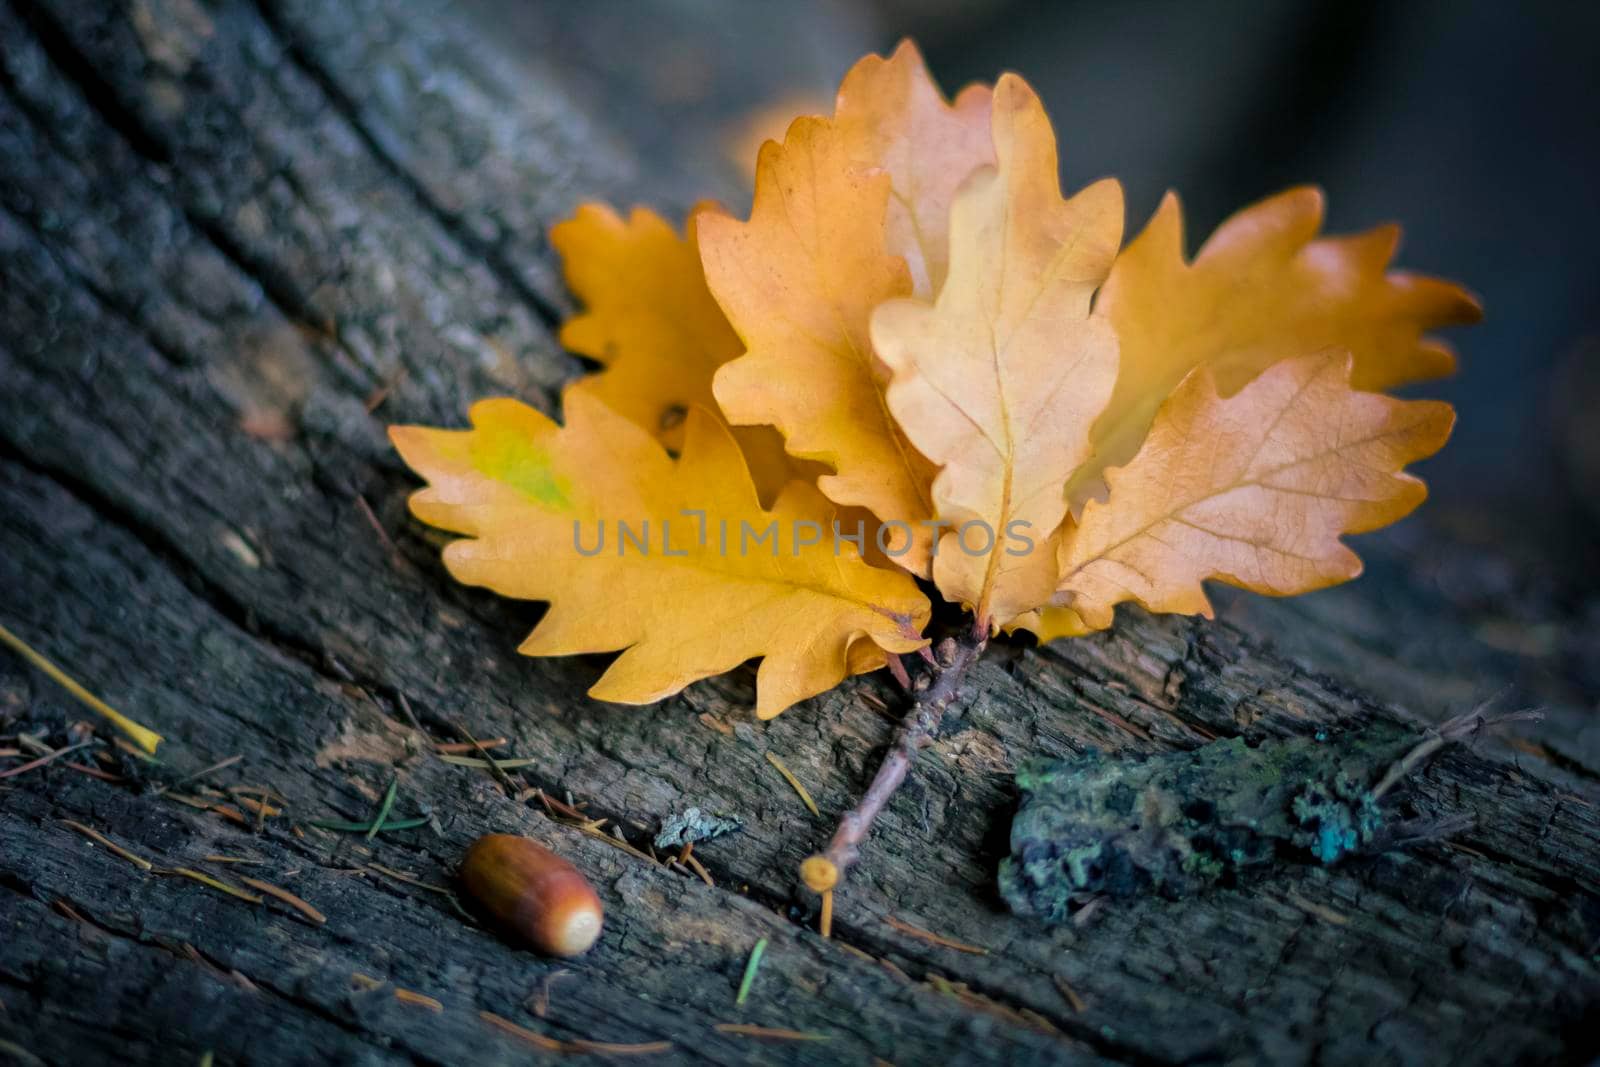 Yellow oak leaves on a log with acorn. by Yurich32